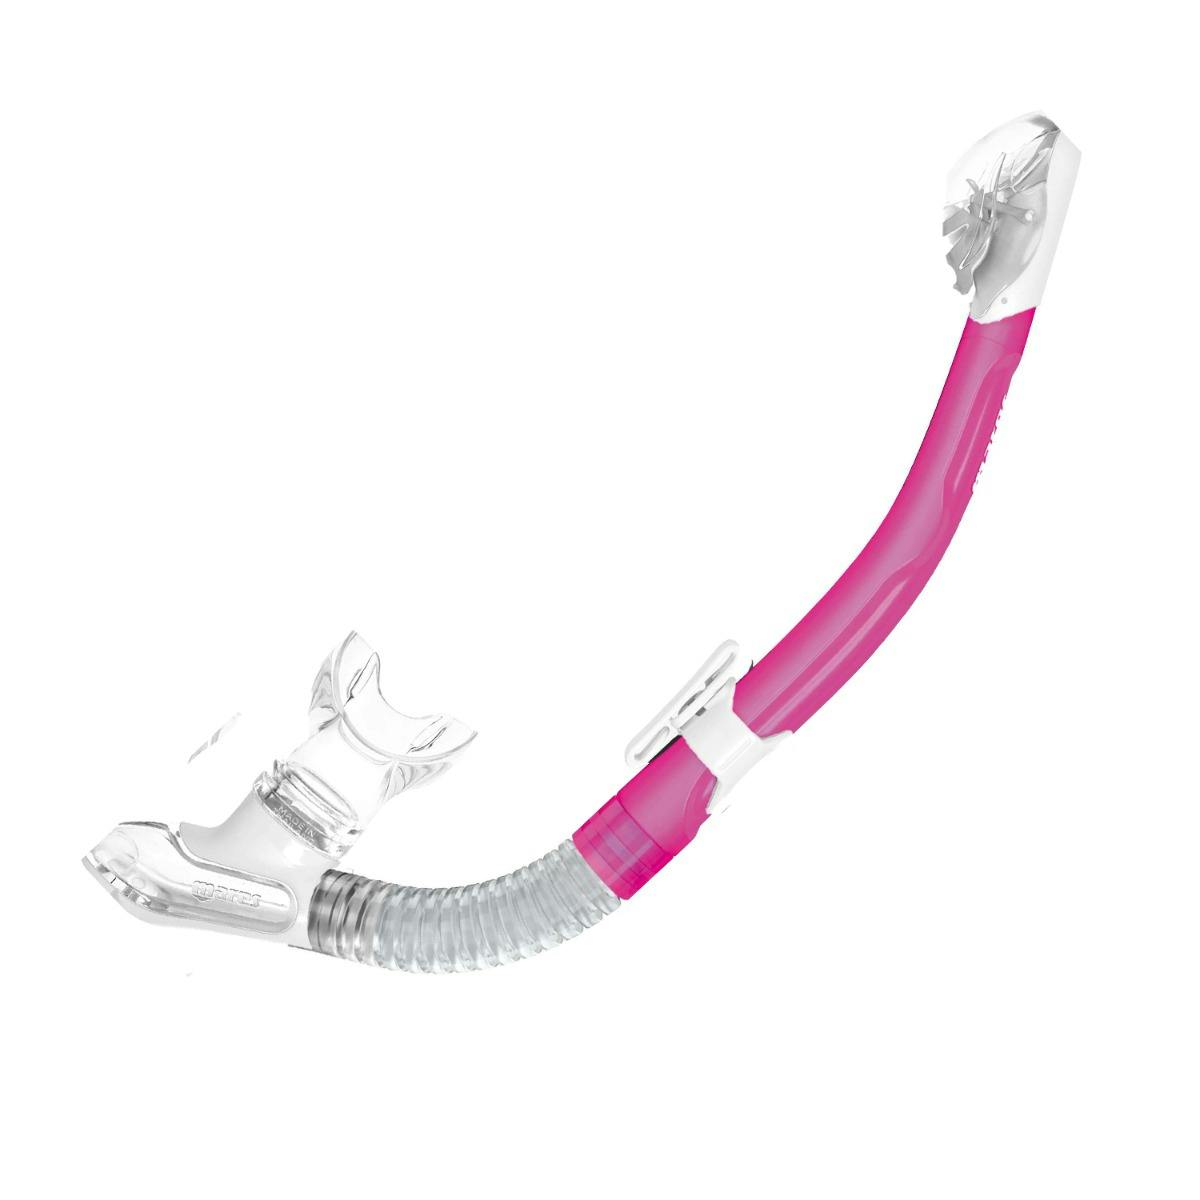 Mares Ergo Dry Snorkel with Exhaust Valve - Royal Pink/White